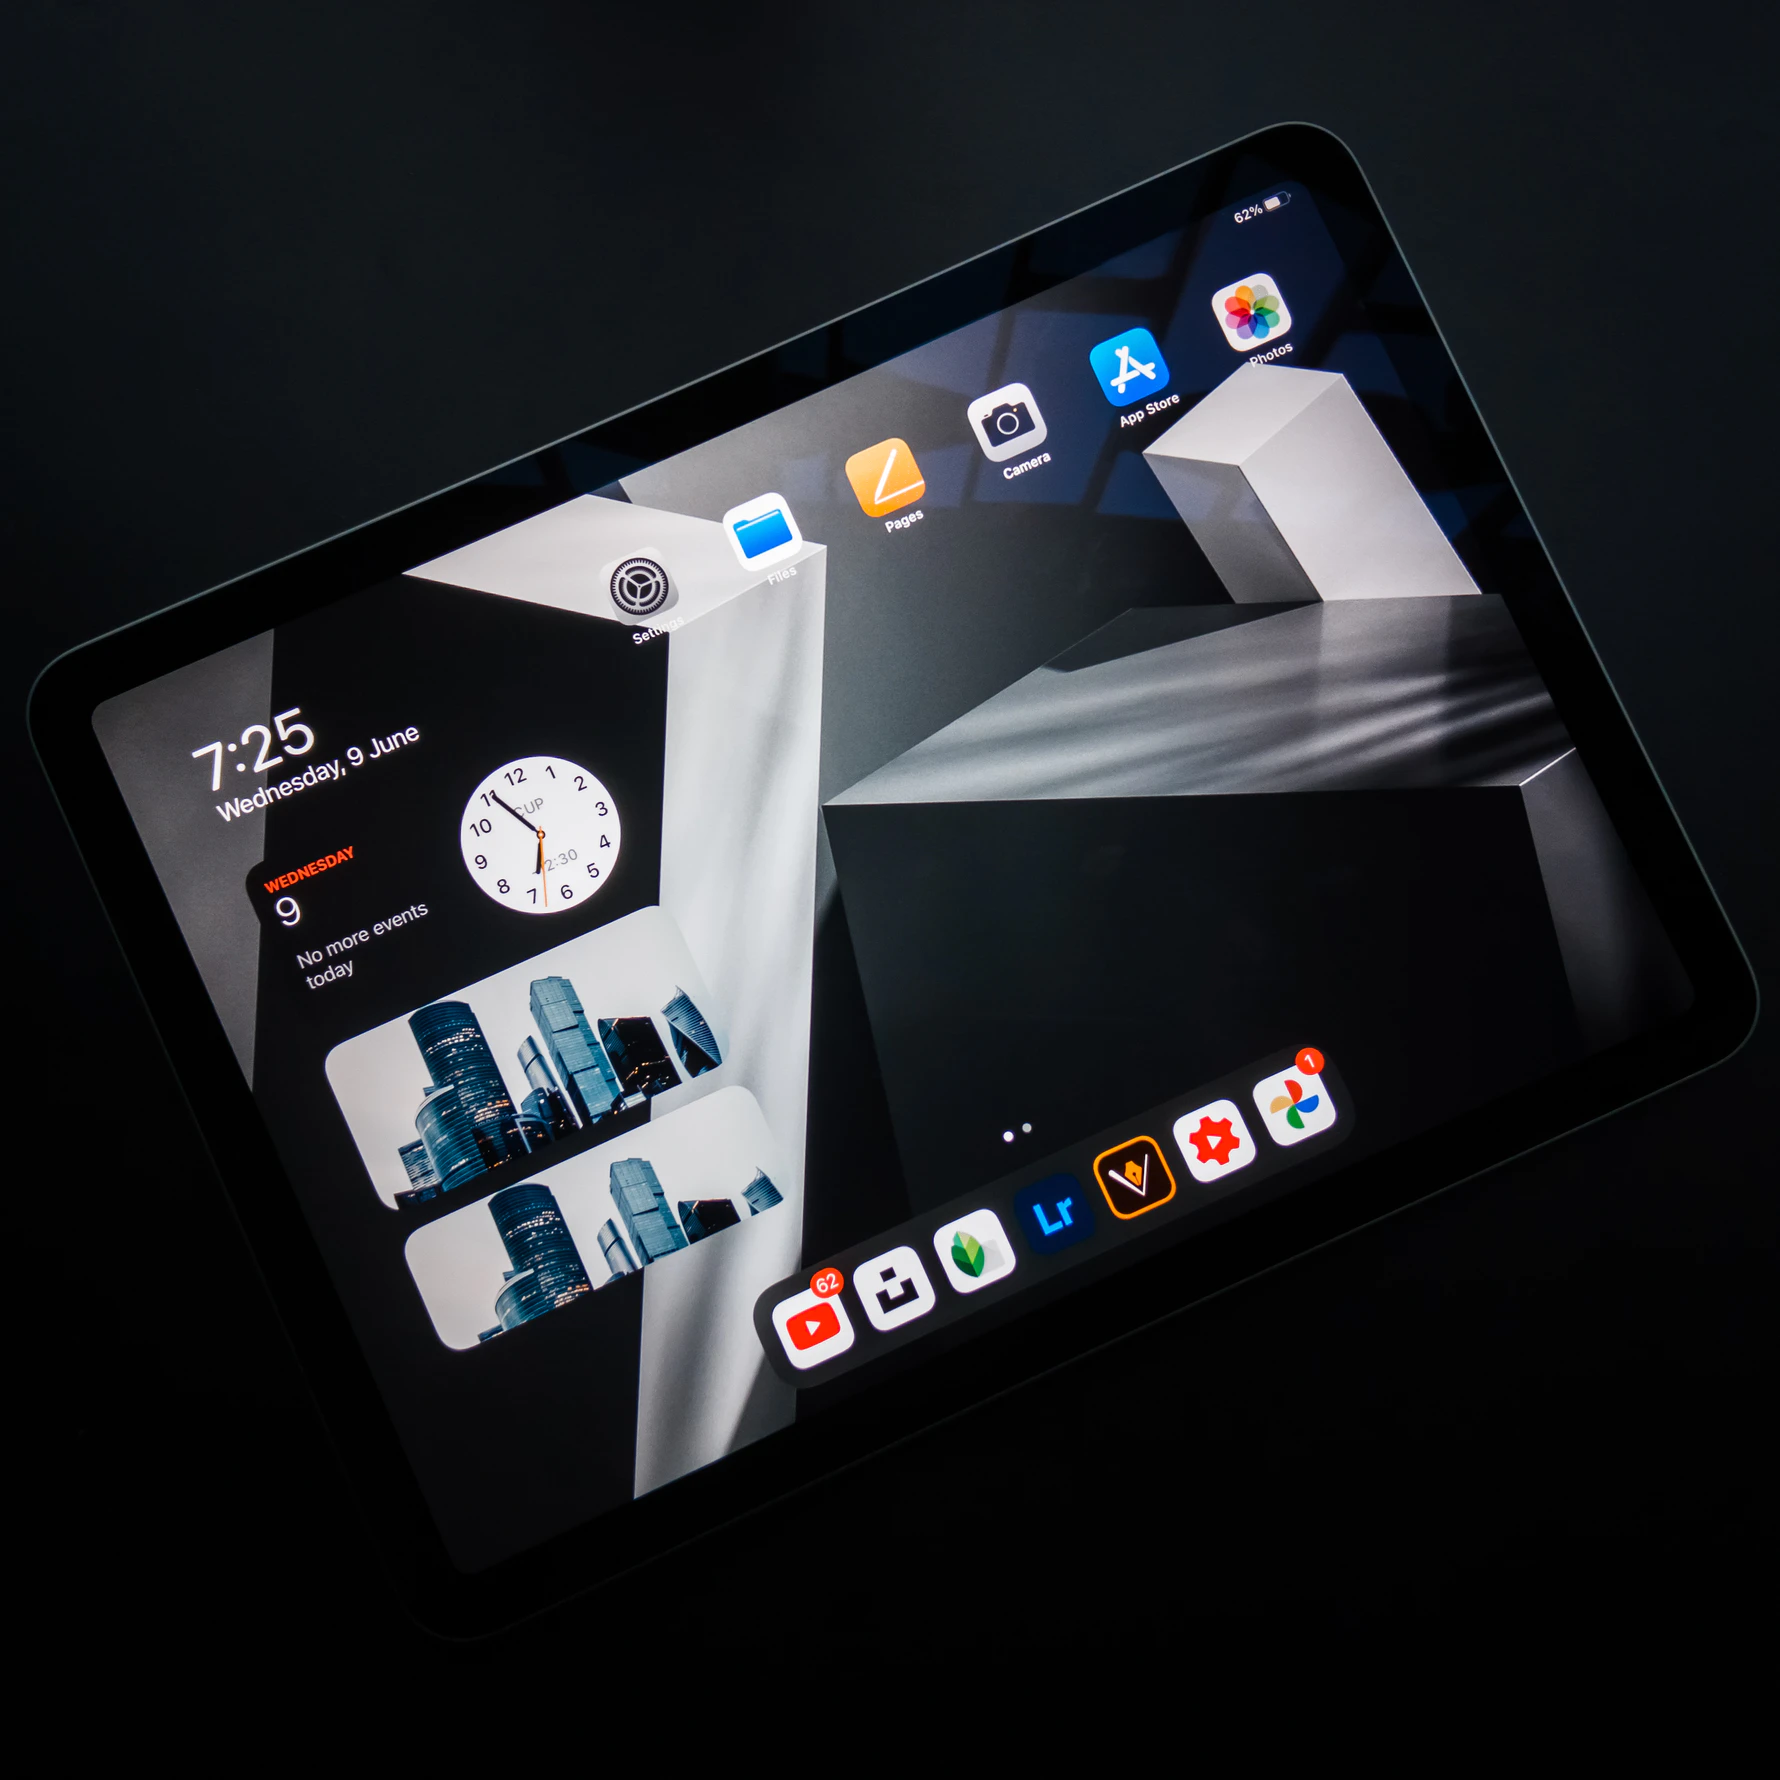 Apple iPad Pro 2022 debuts with M2 SoC and 5G connectivity: Details